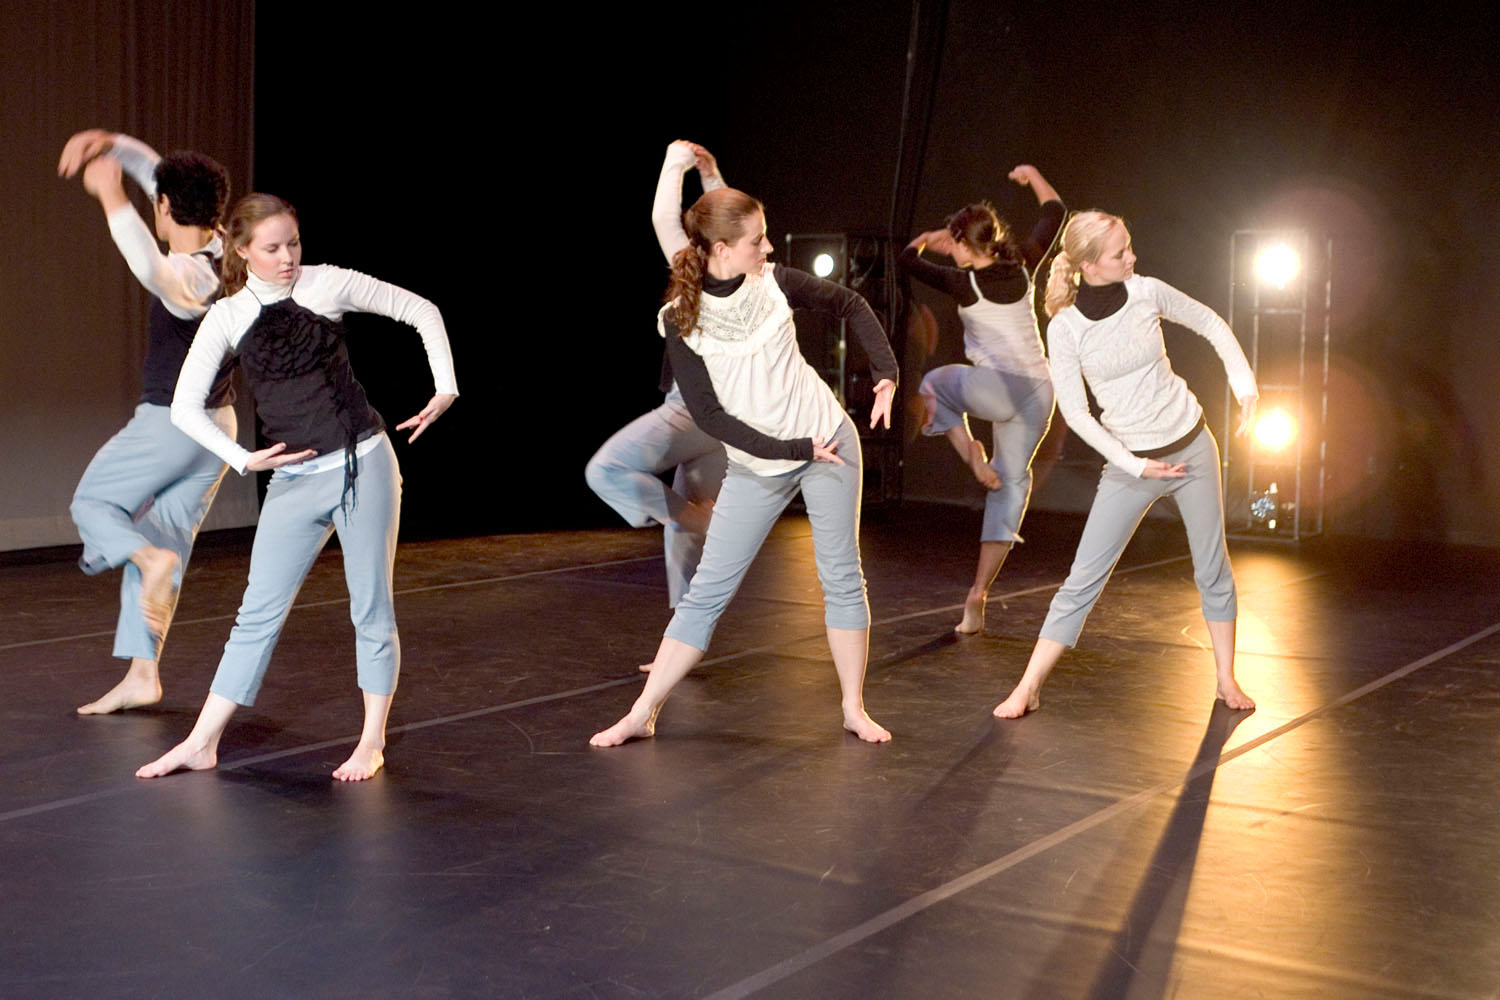 Student dancers dancing on stage